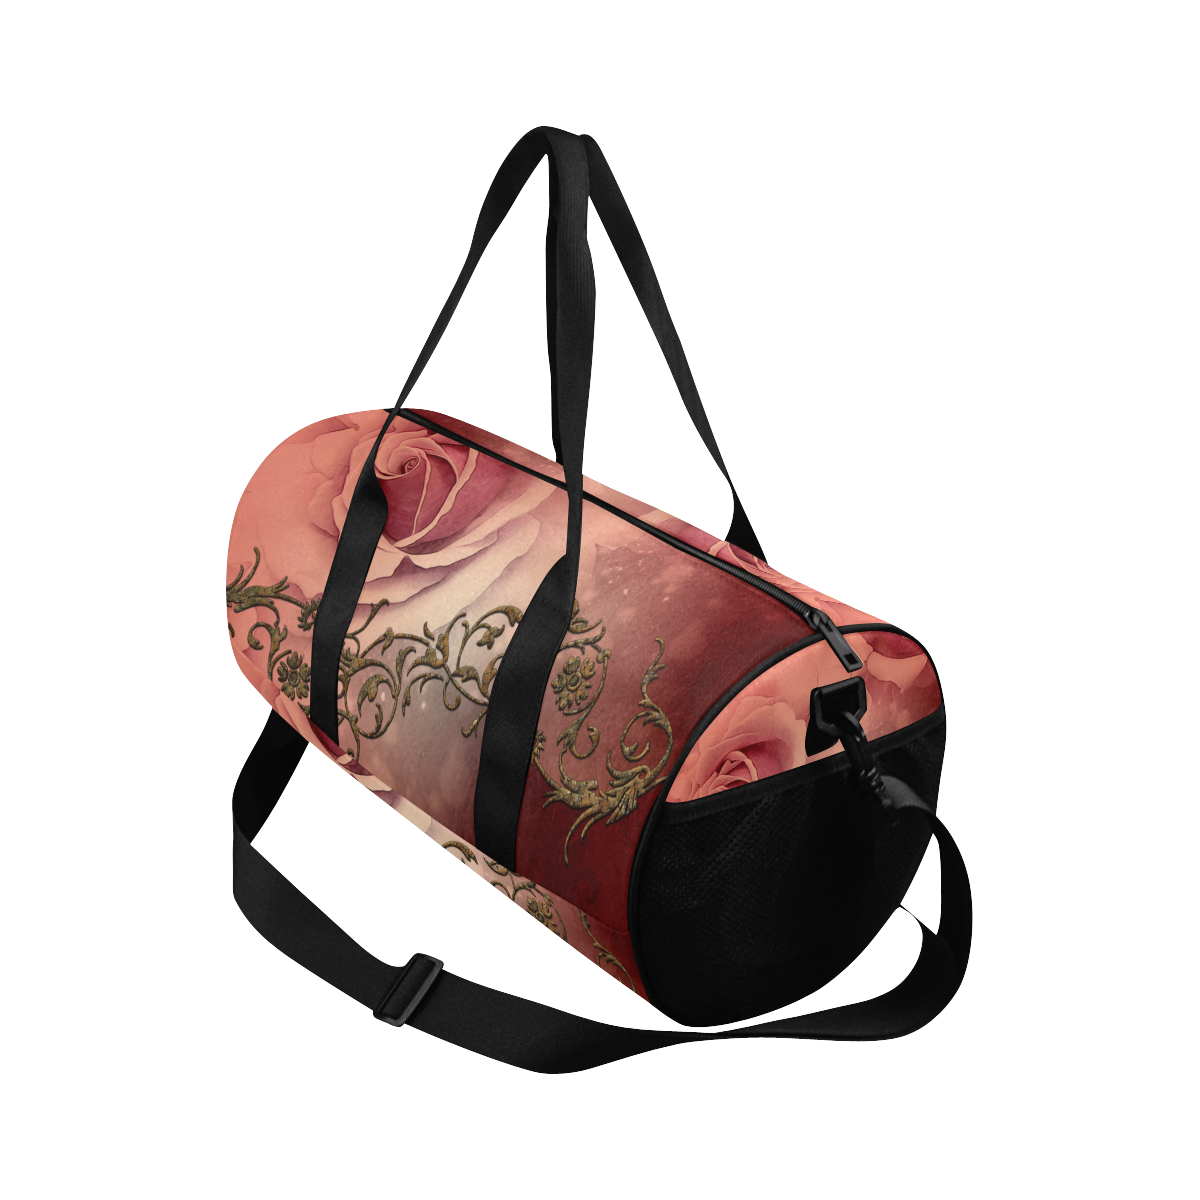 Wonderful roses with floral elements Duffle Bag (Model 1679)